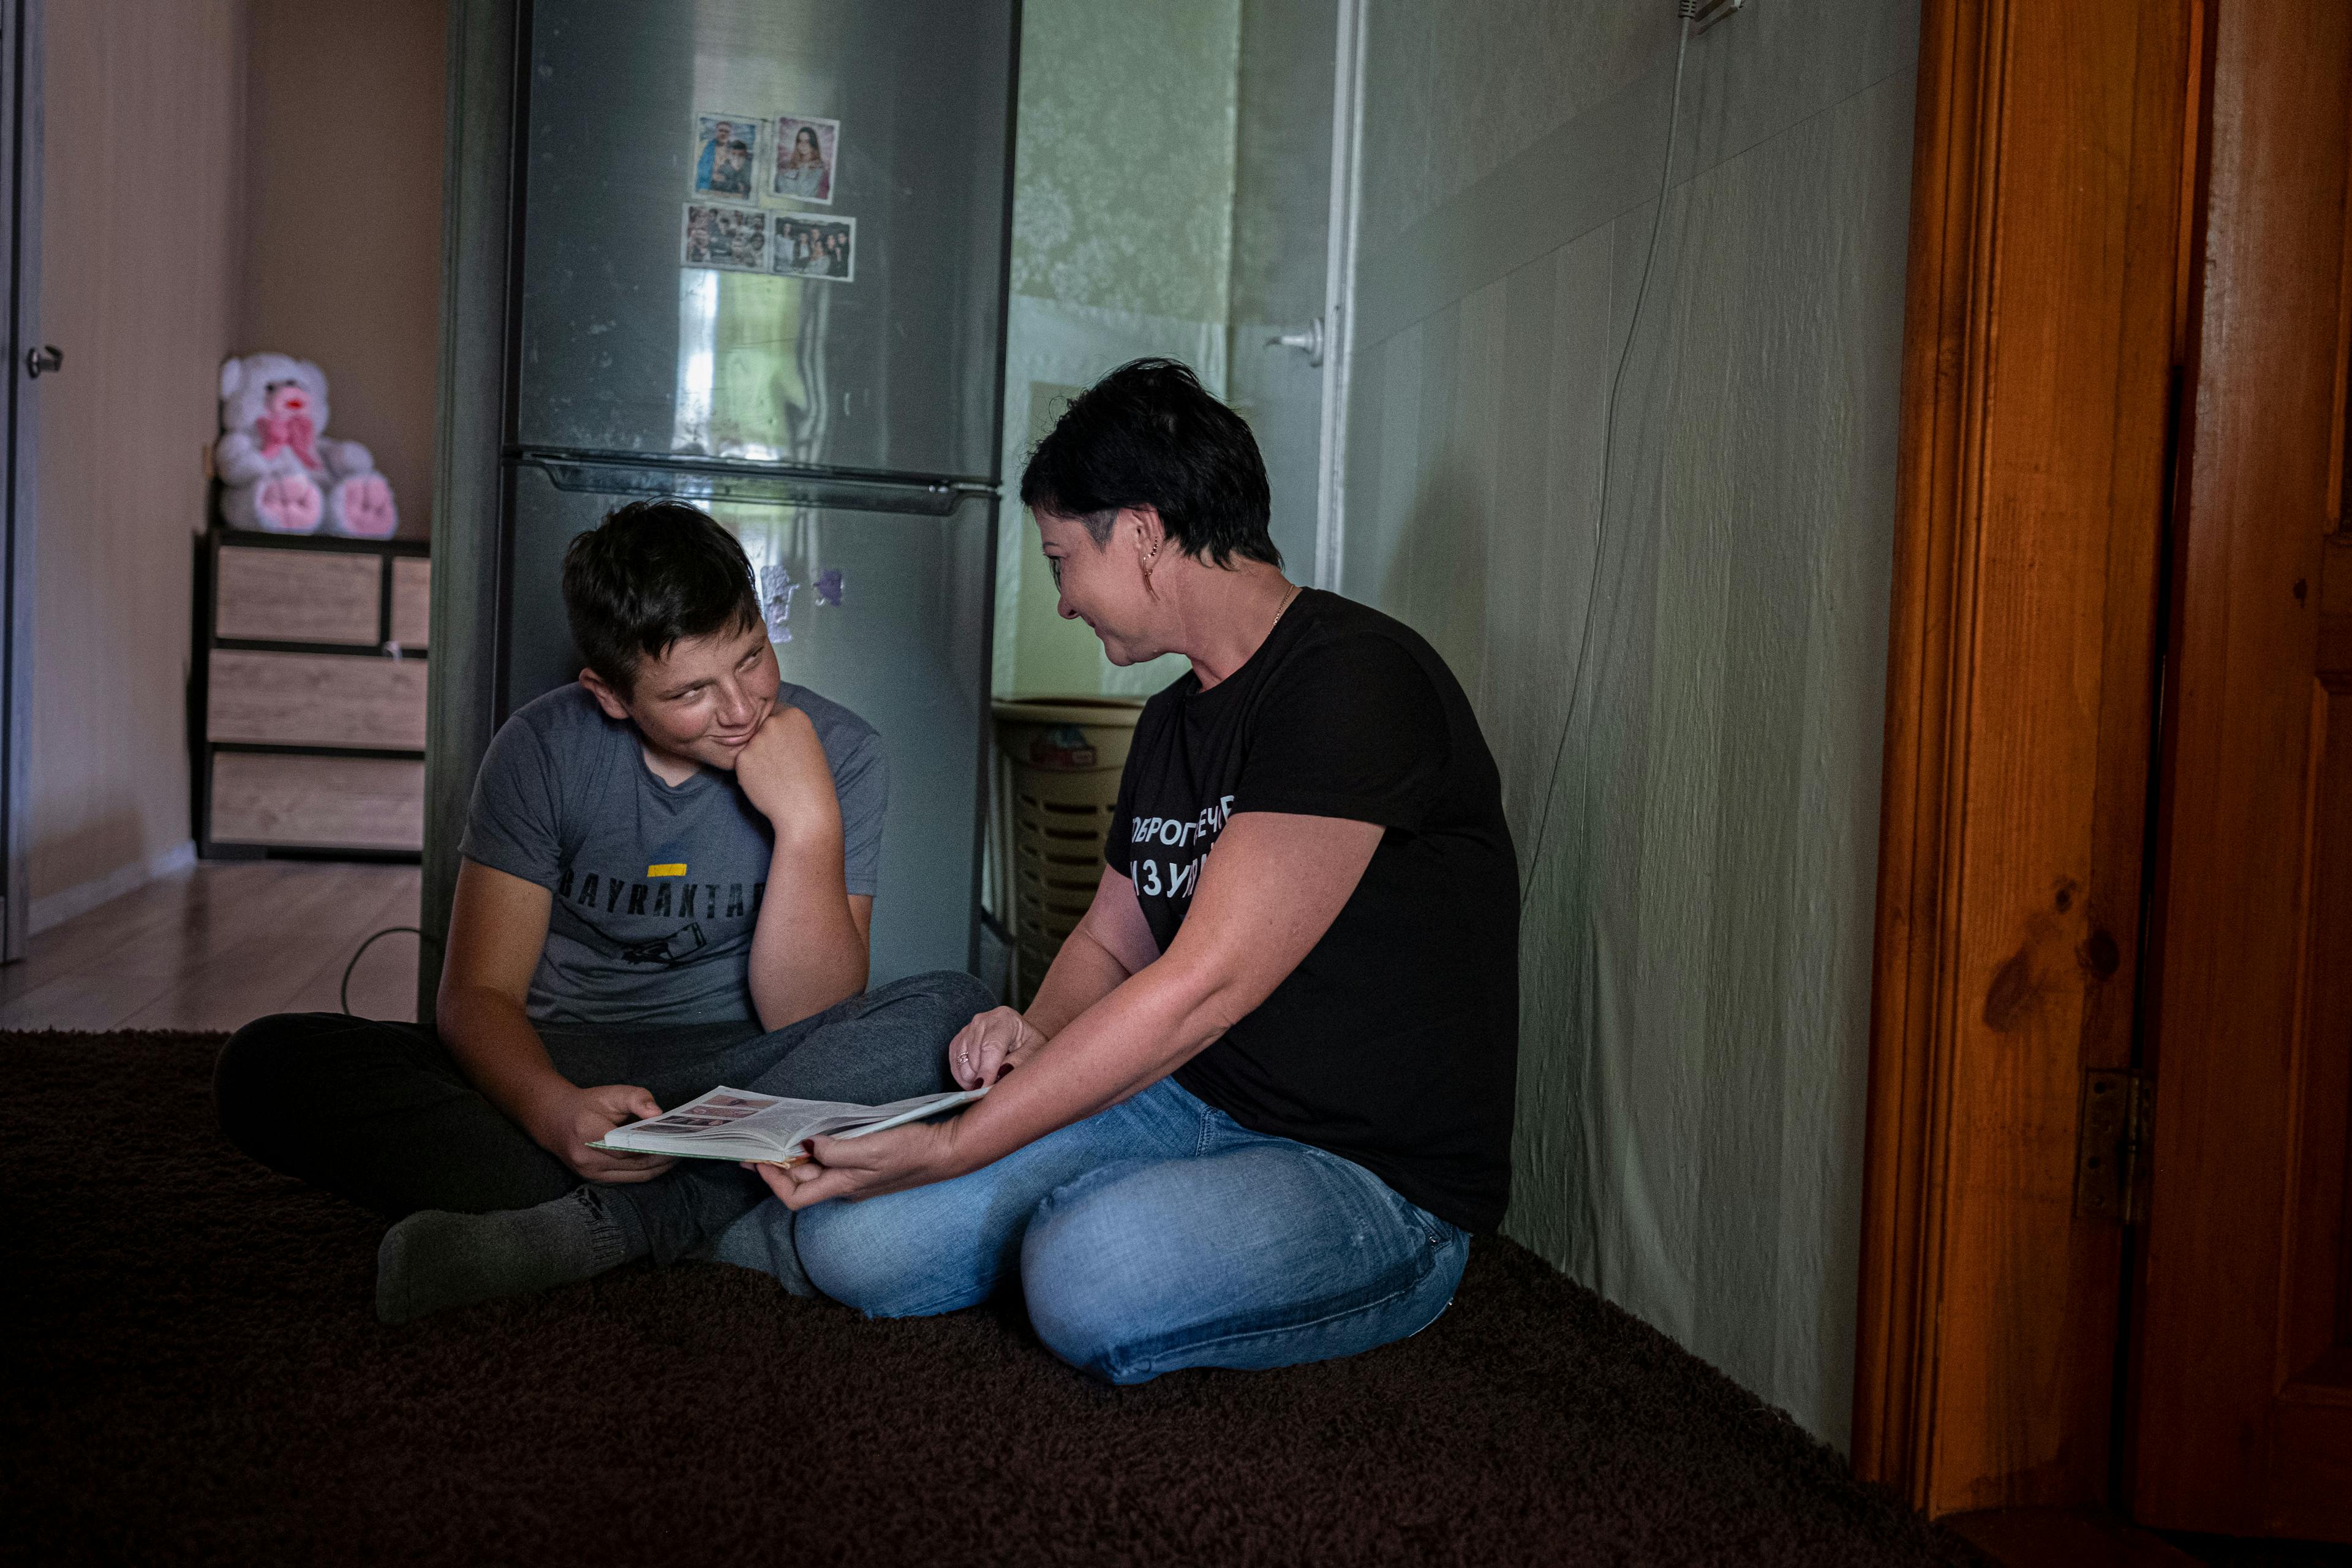 On 13 August 2022, Nazar, 13, and his mother,  Alina, show how they studied when fighting was taking place around their home, in the village of Olyzarivka, Ukraine.